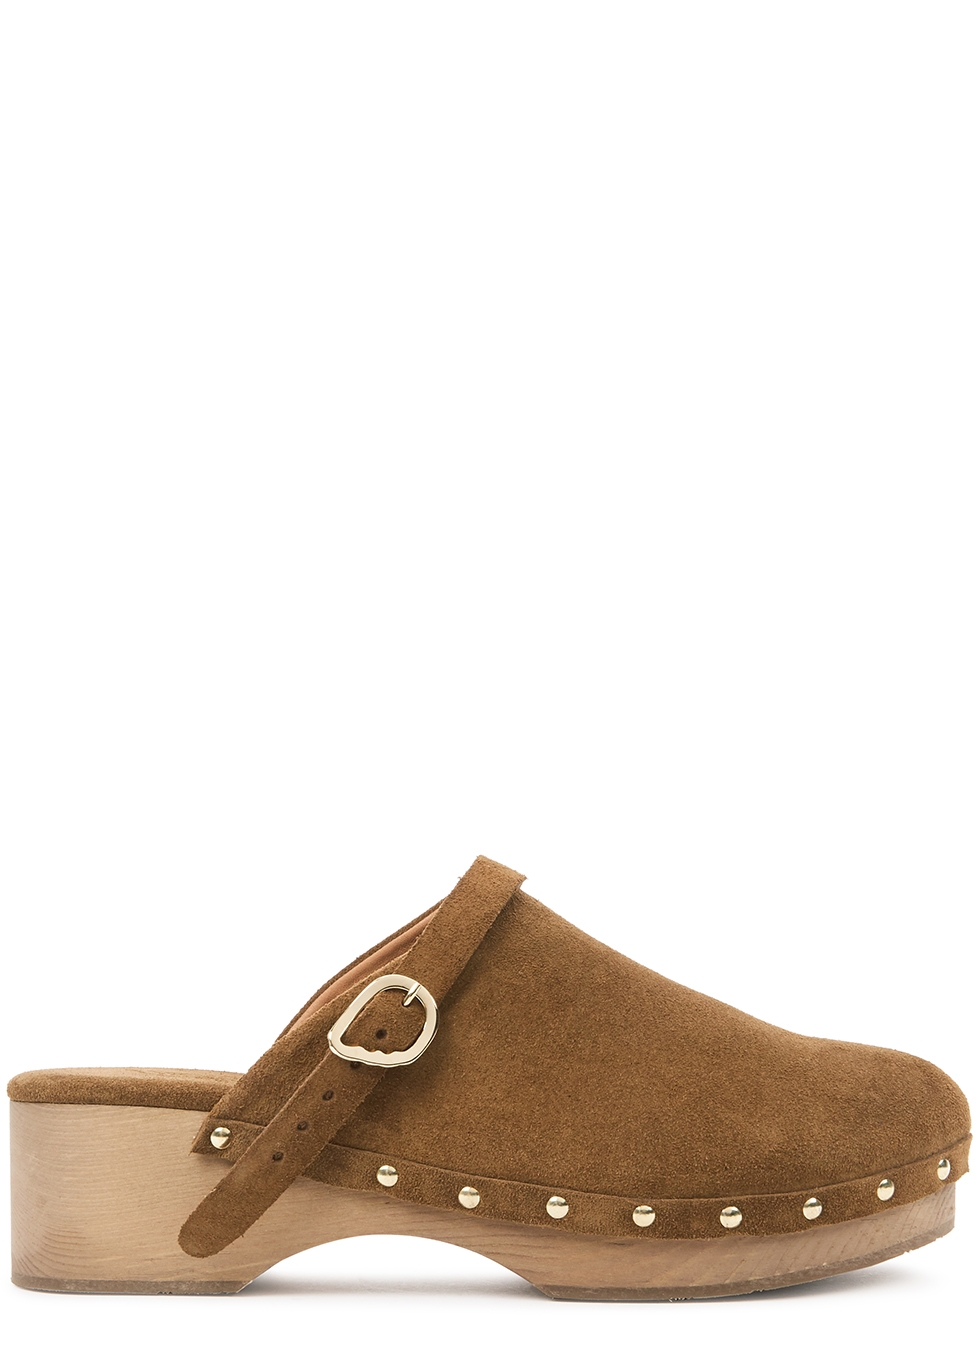 Classic brown suede clogs